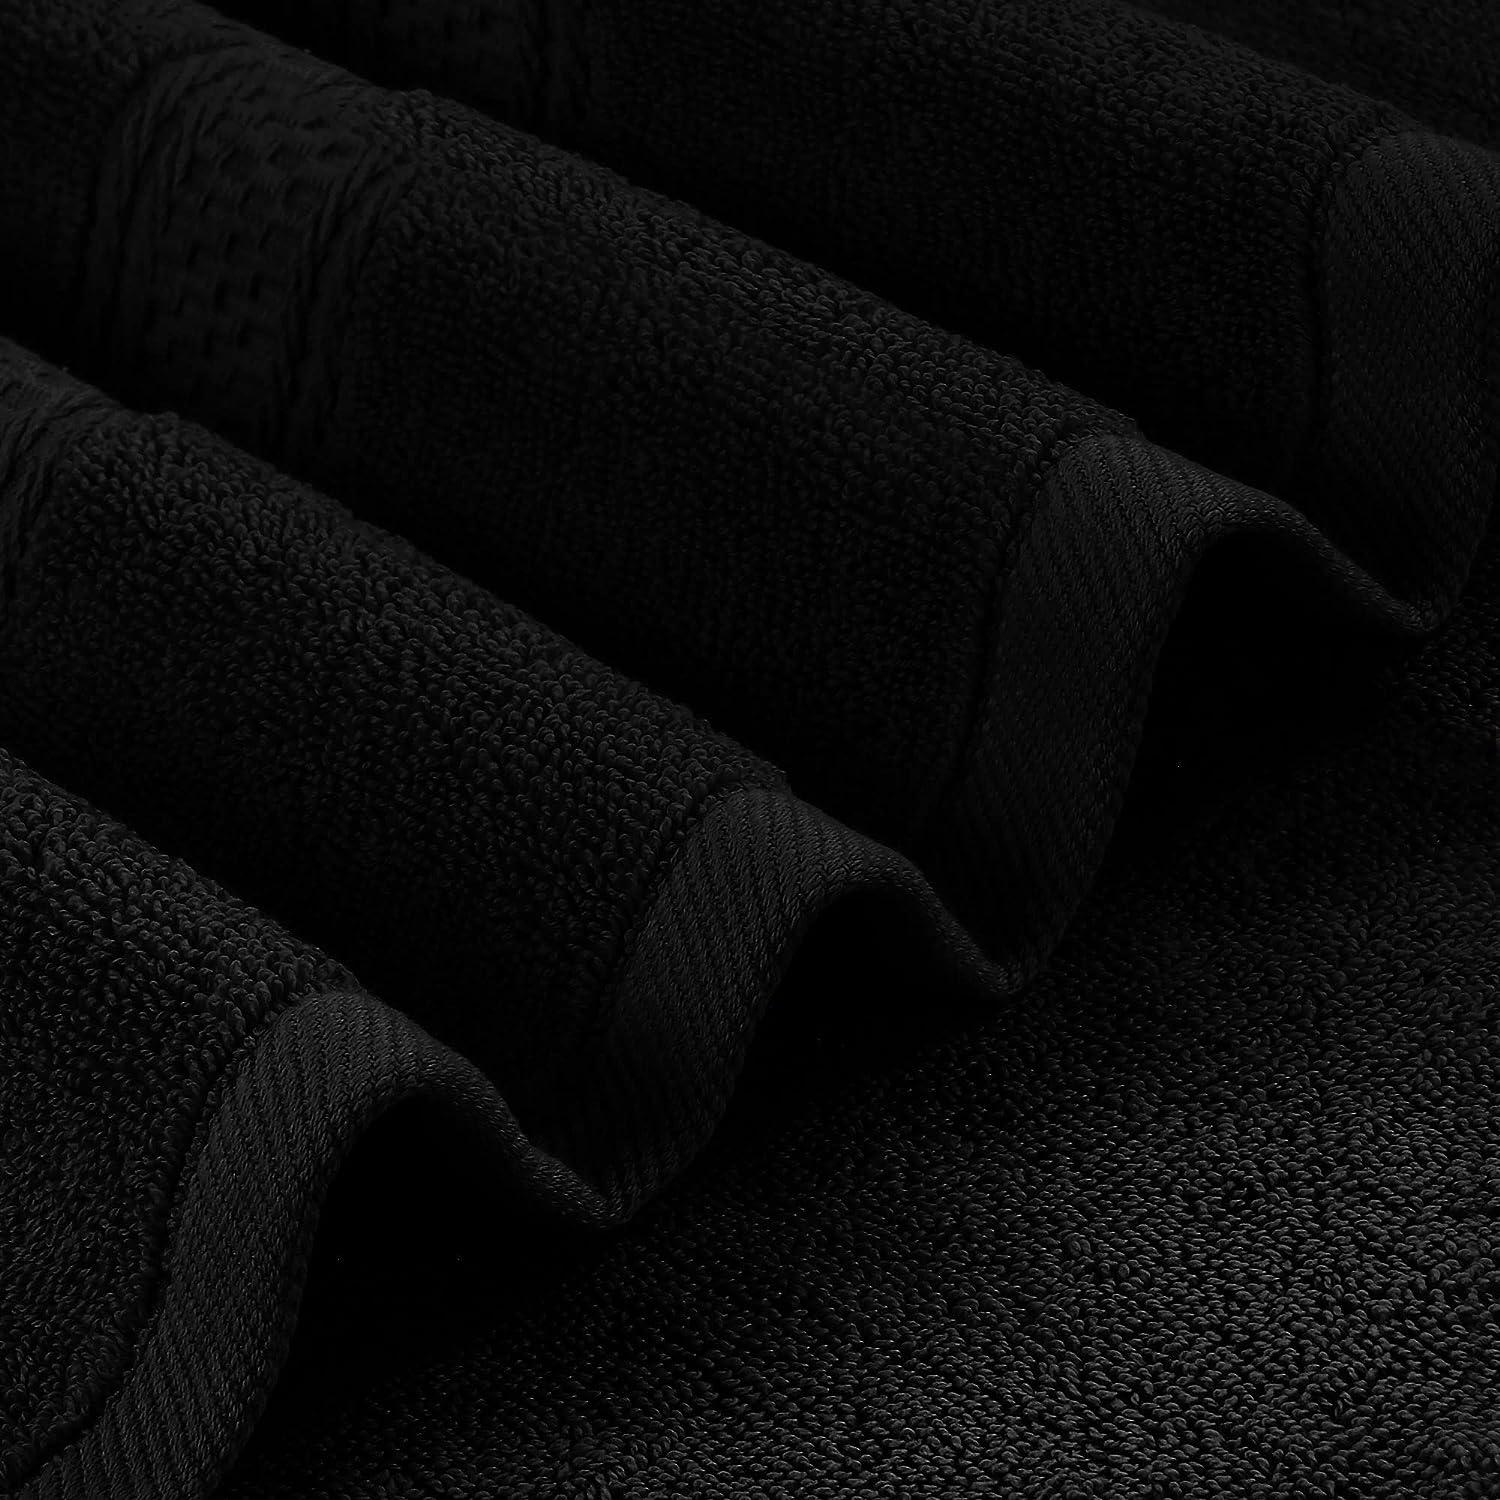 Utopia Towels 4 Pack Premium Bath Towels Set, (27 x 54 Inches) 100% Ring  Spun Cotton 600GSM, Lightweight and Highly Absorbent Quick Drying Towels,  Perfect for Daily Use (Black) 4 Piece Bath Towel Set Black